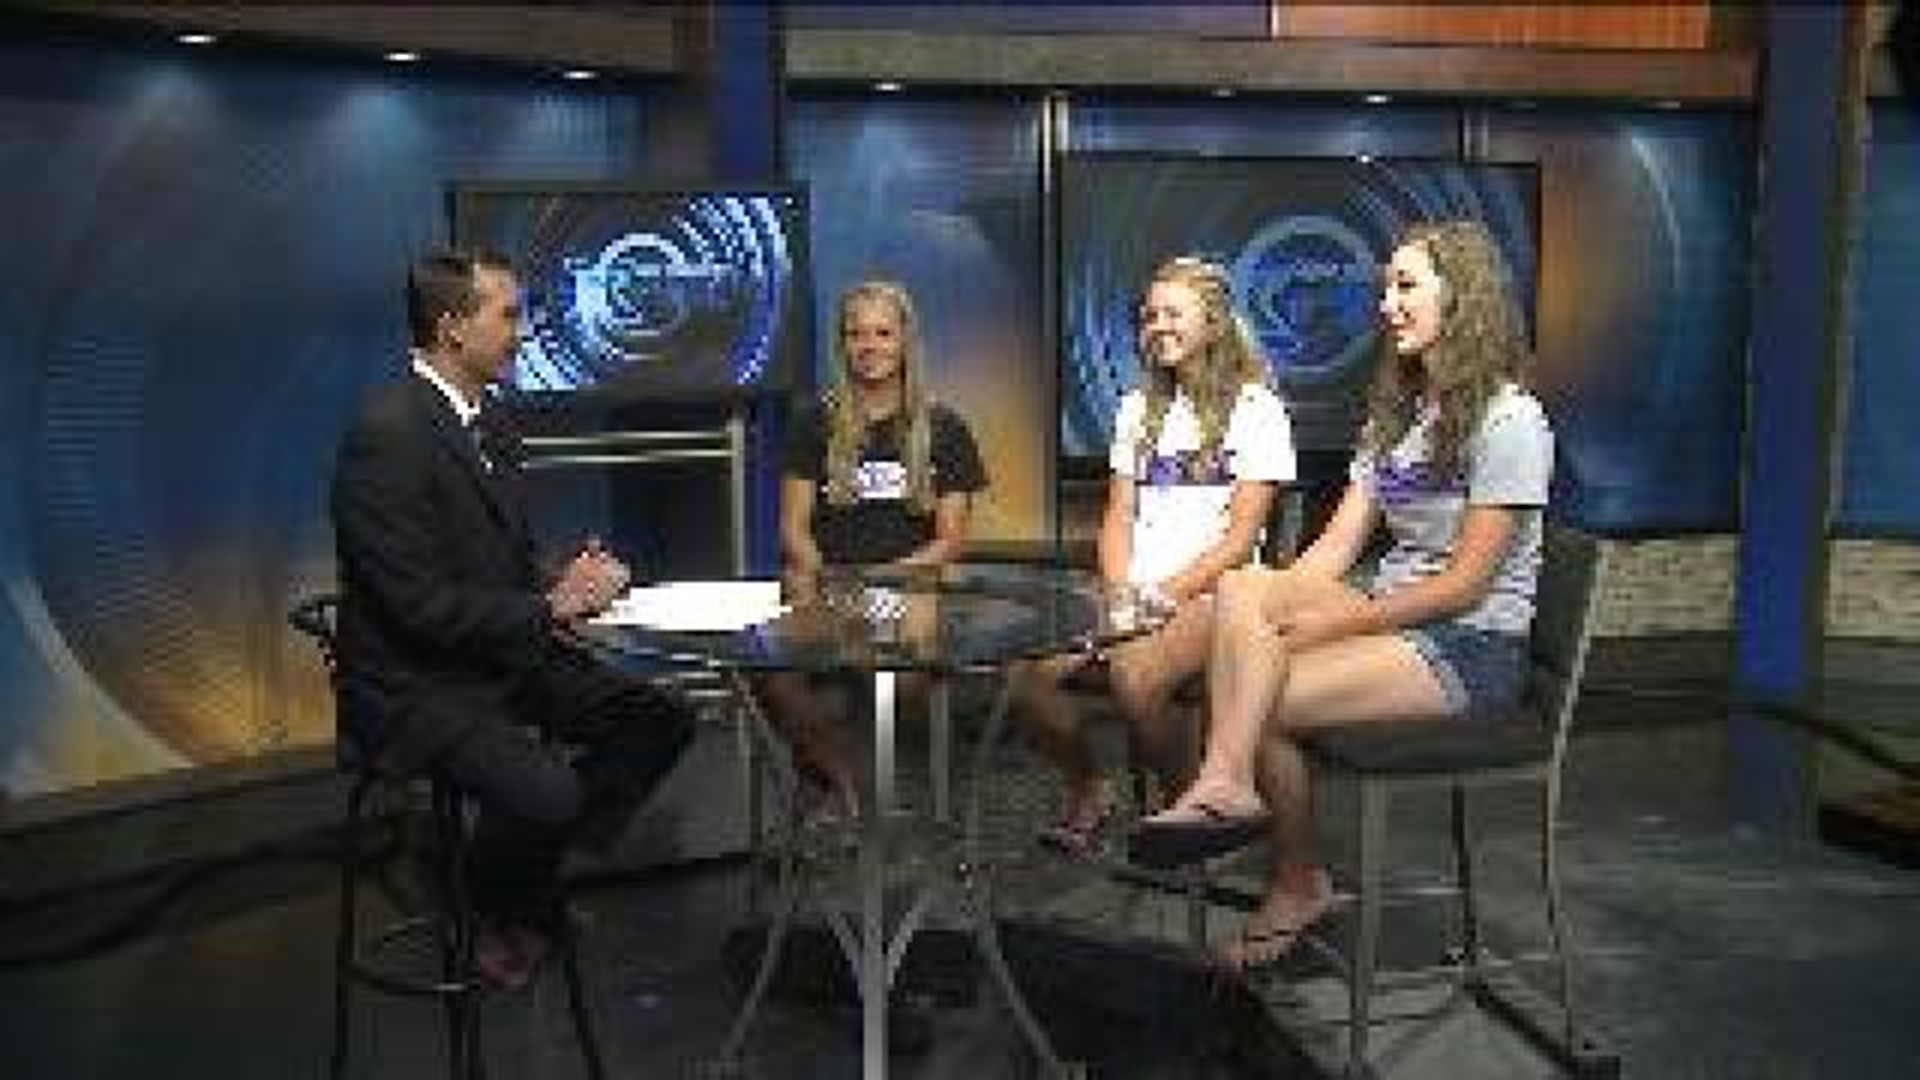 Muscatine Softball Players On QCSX Part 2